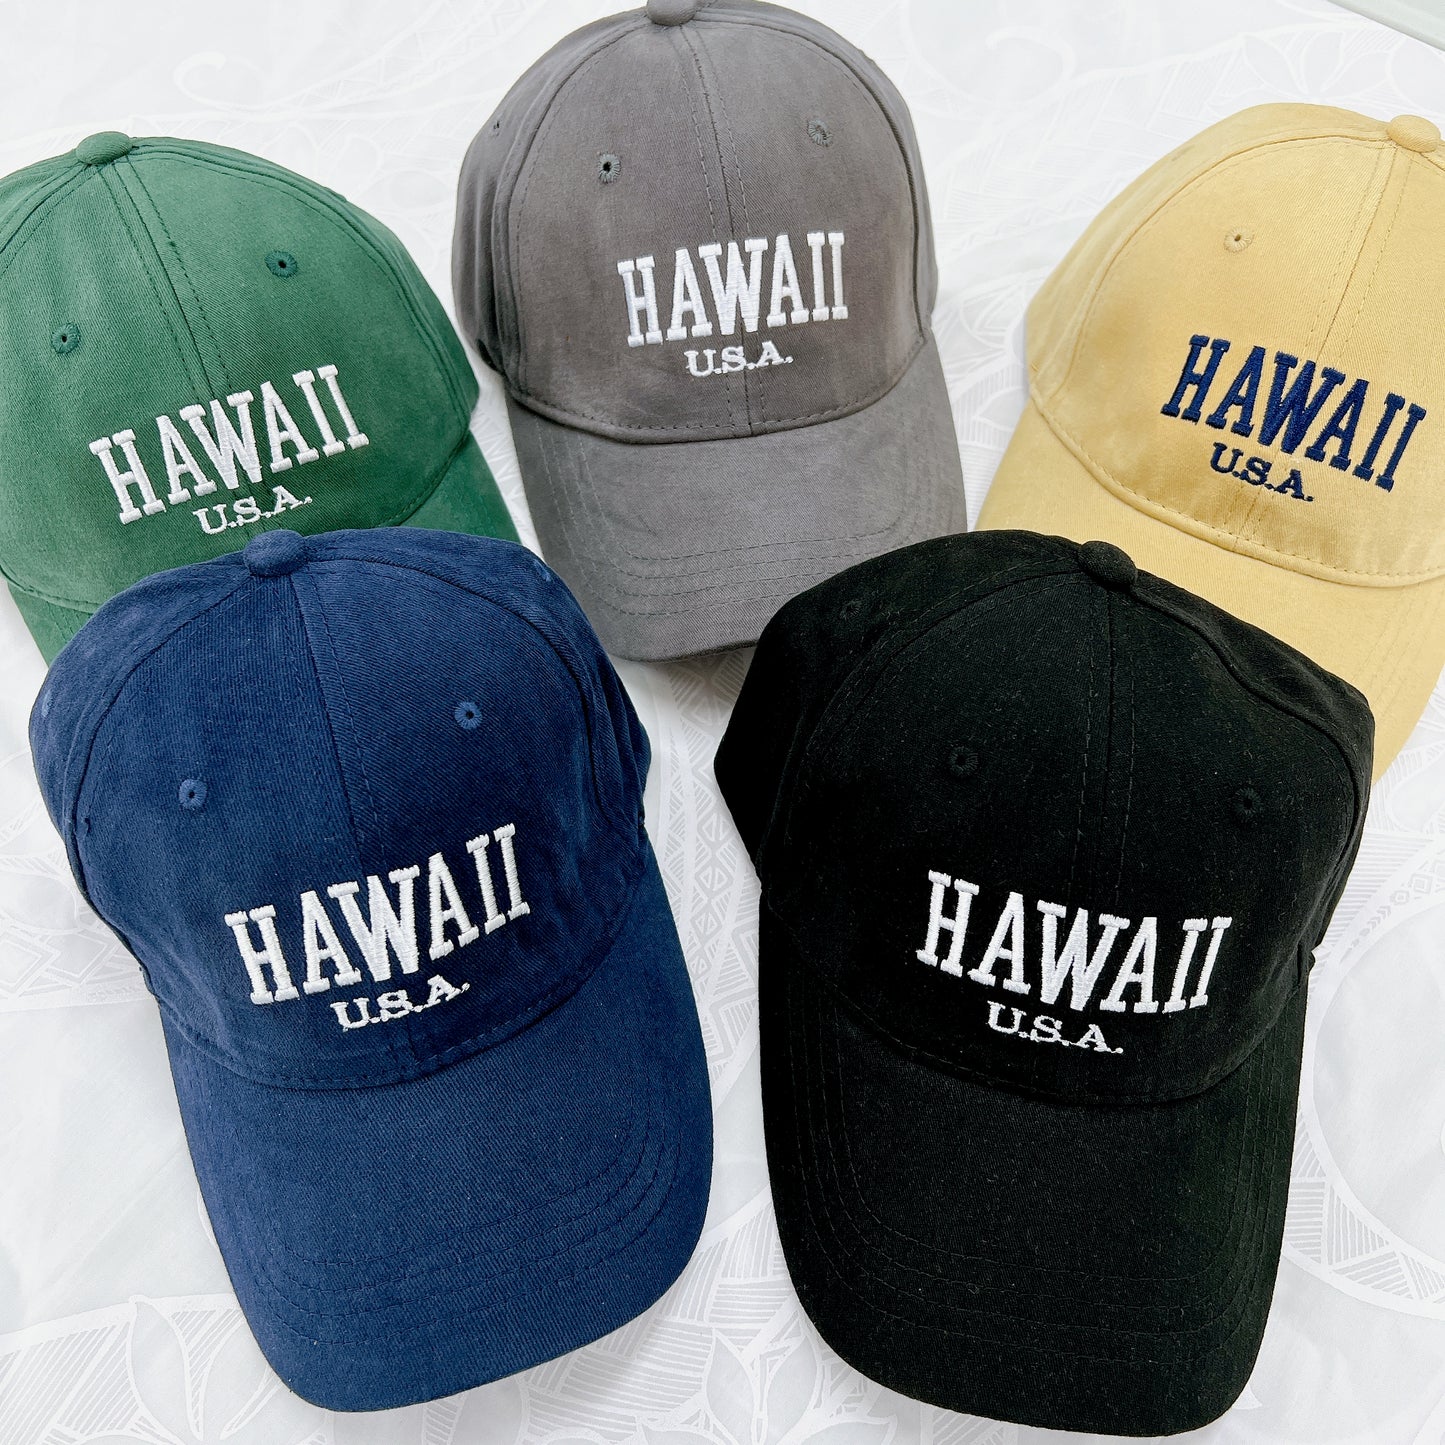 HAWAII embroidered cap